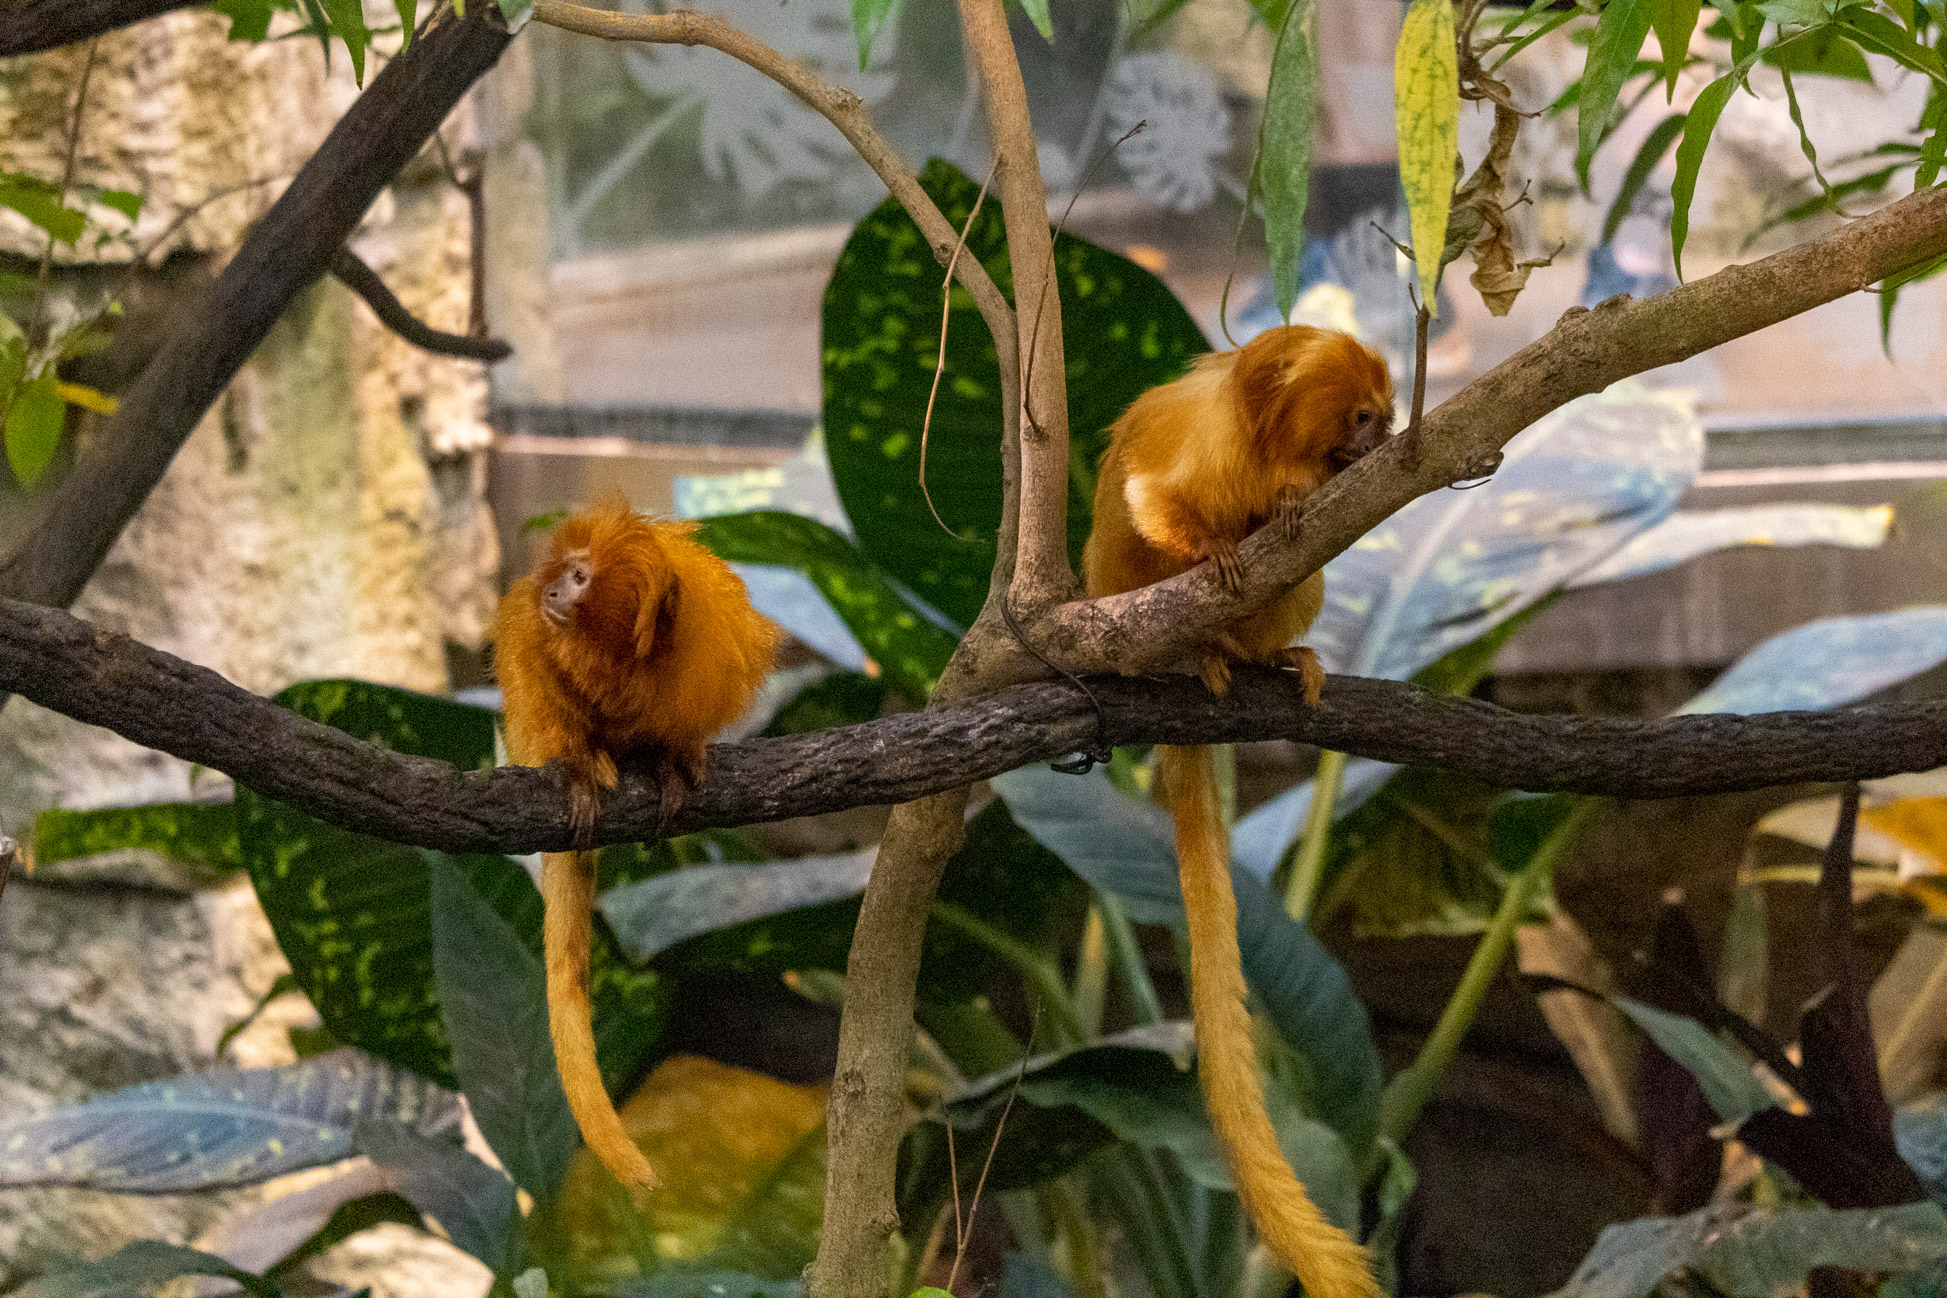 Two small orange monkeys sitting on a tree branch together